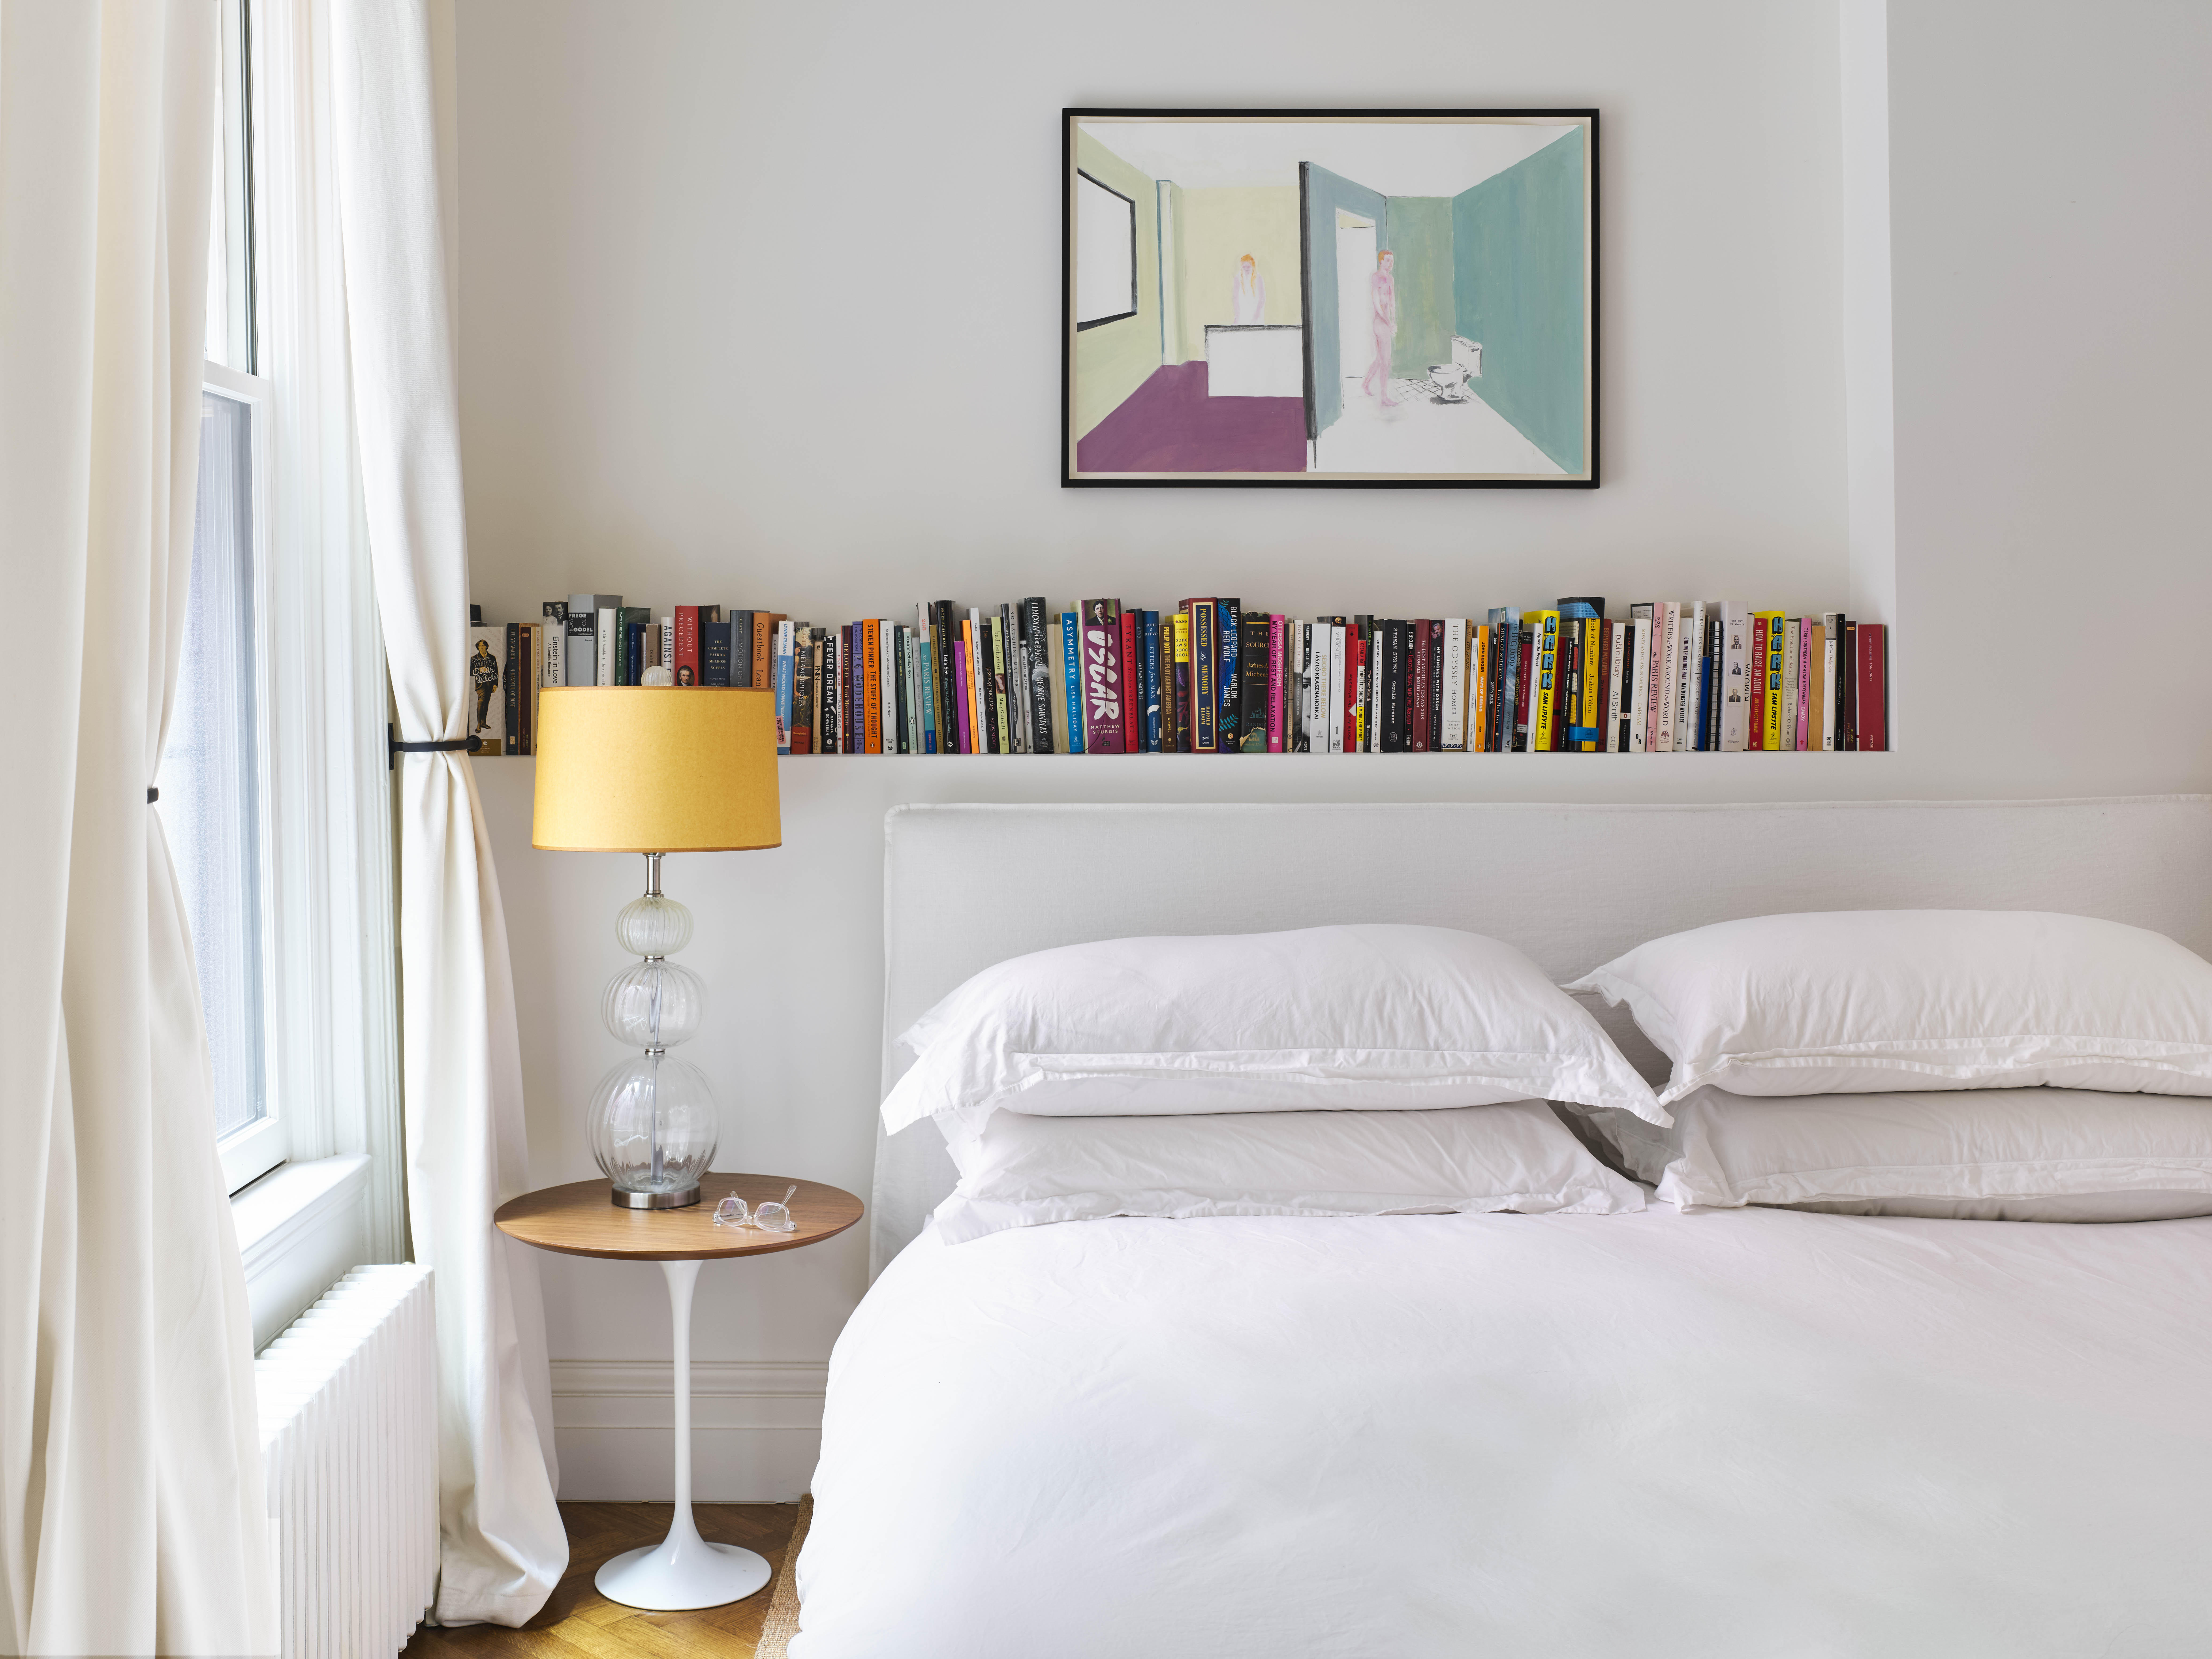 Mark van Yetter's Untitled, 2014, available on Platform, on view in a bedroom.